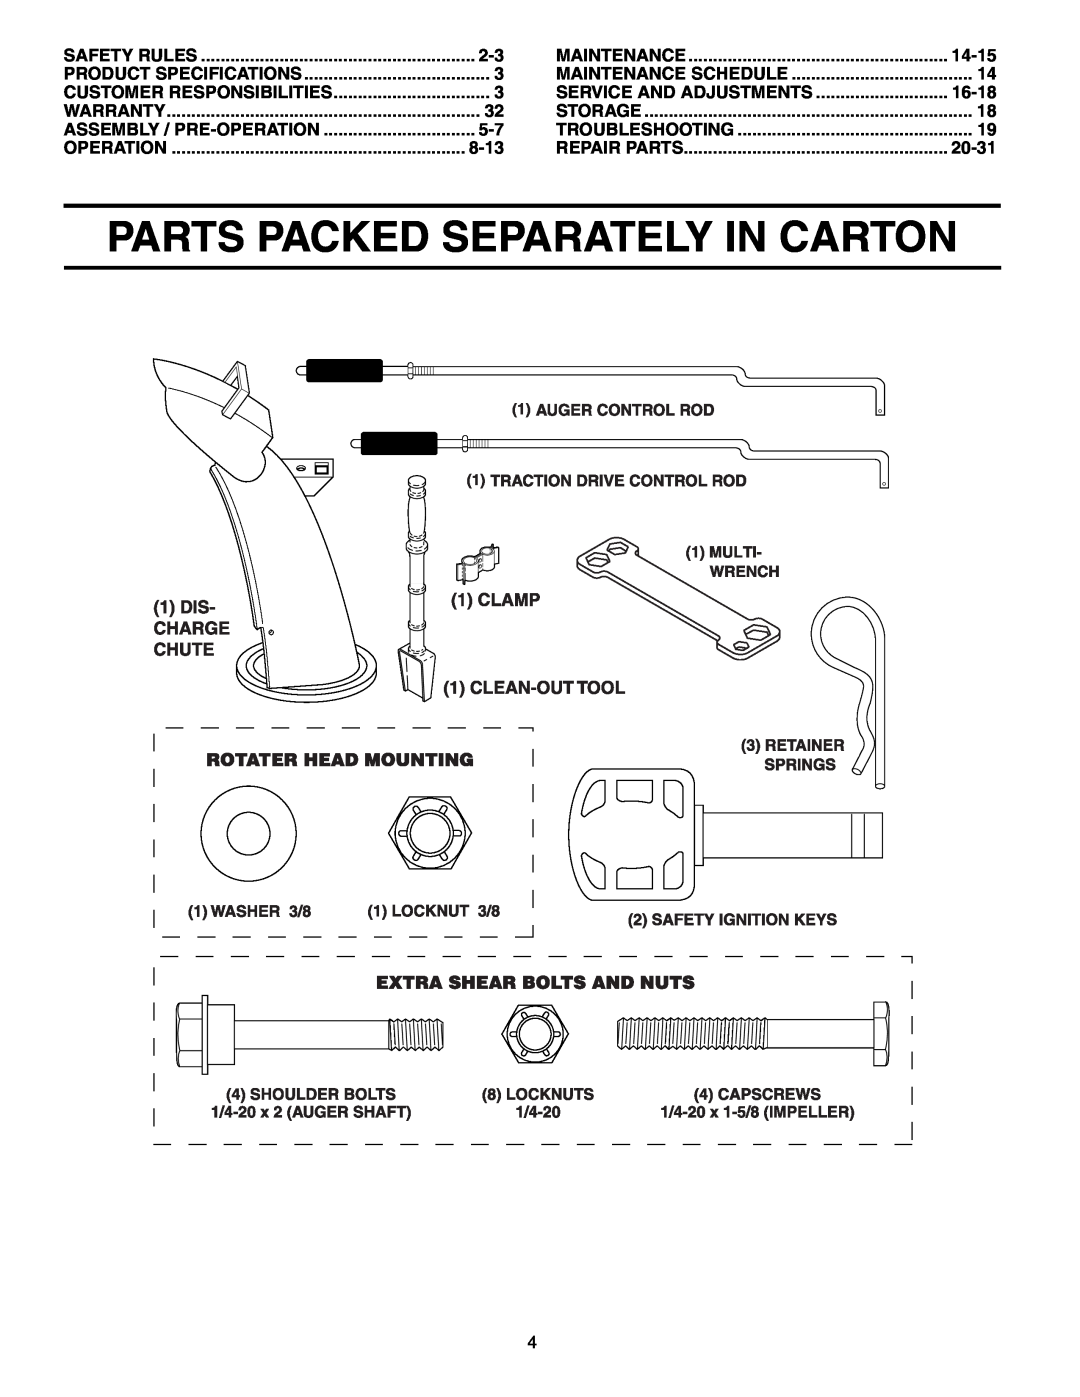 Poulan 192030 owner manual Parts Packed Separately In Carton, 8-13, 14-15, Service And Adjustments, 16-18, 20-31 